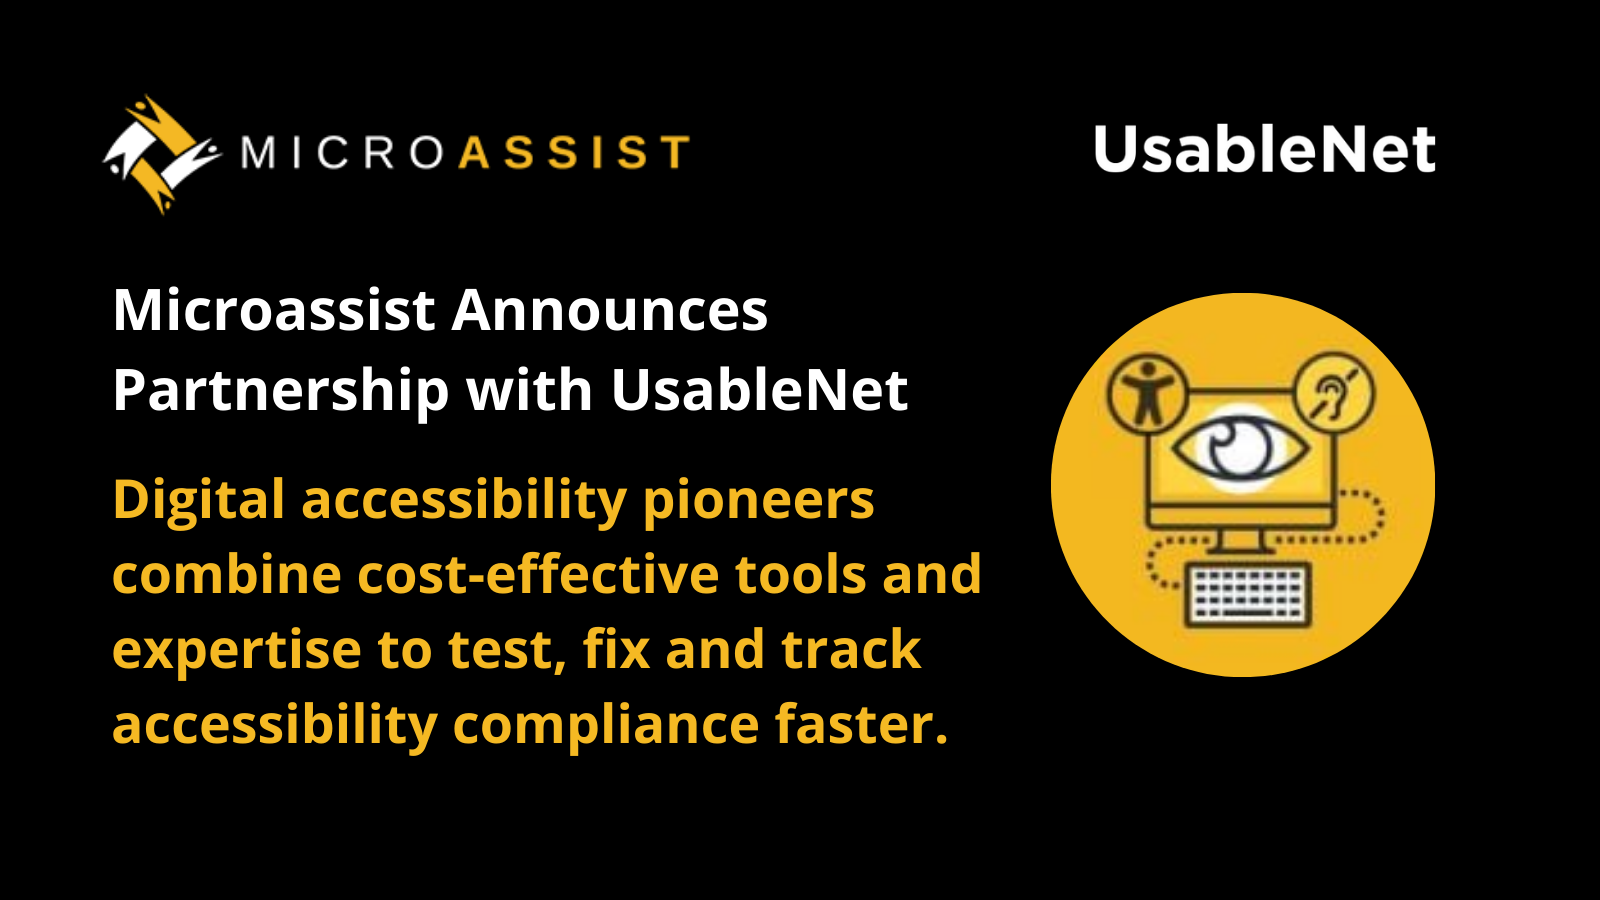 UsableNet is now a Microassist Partner